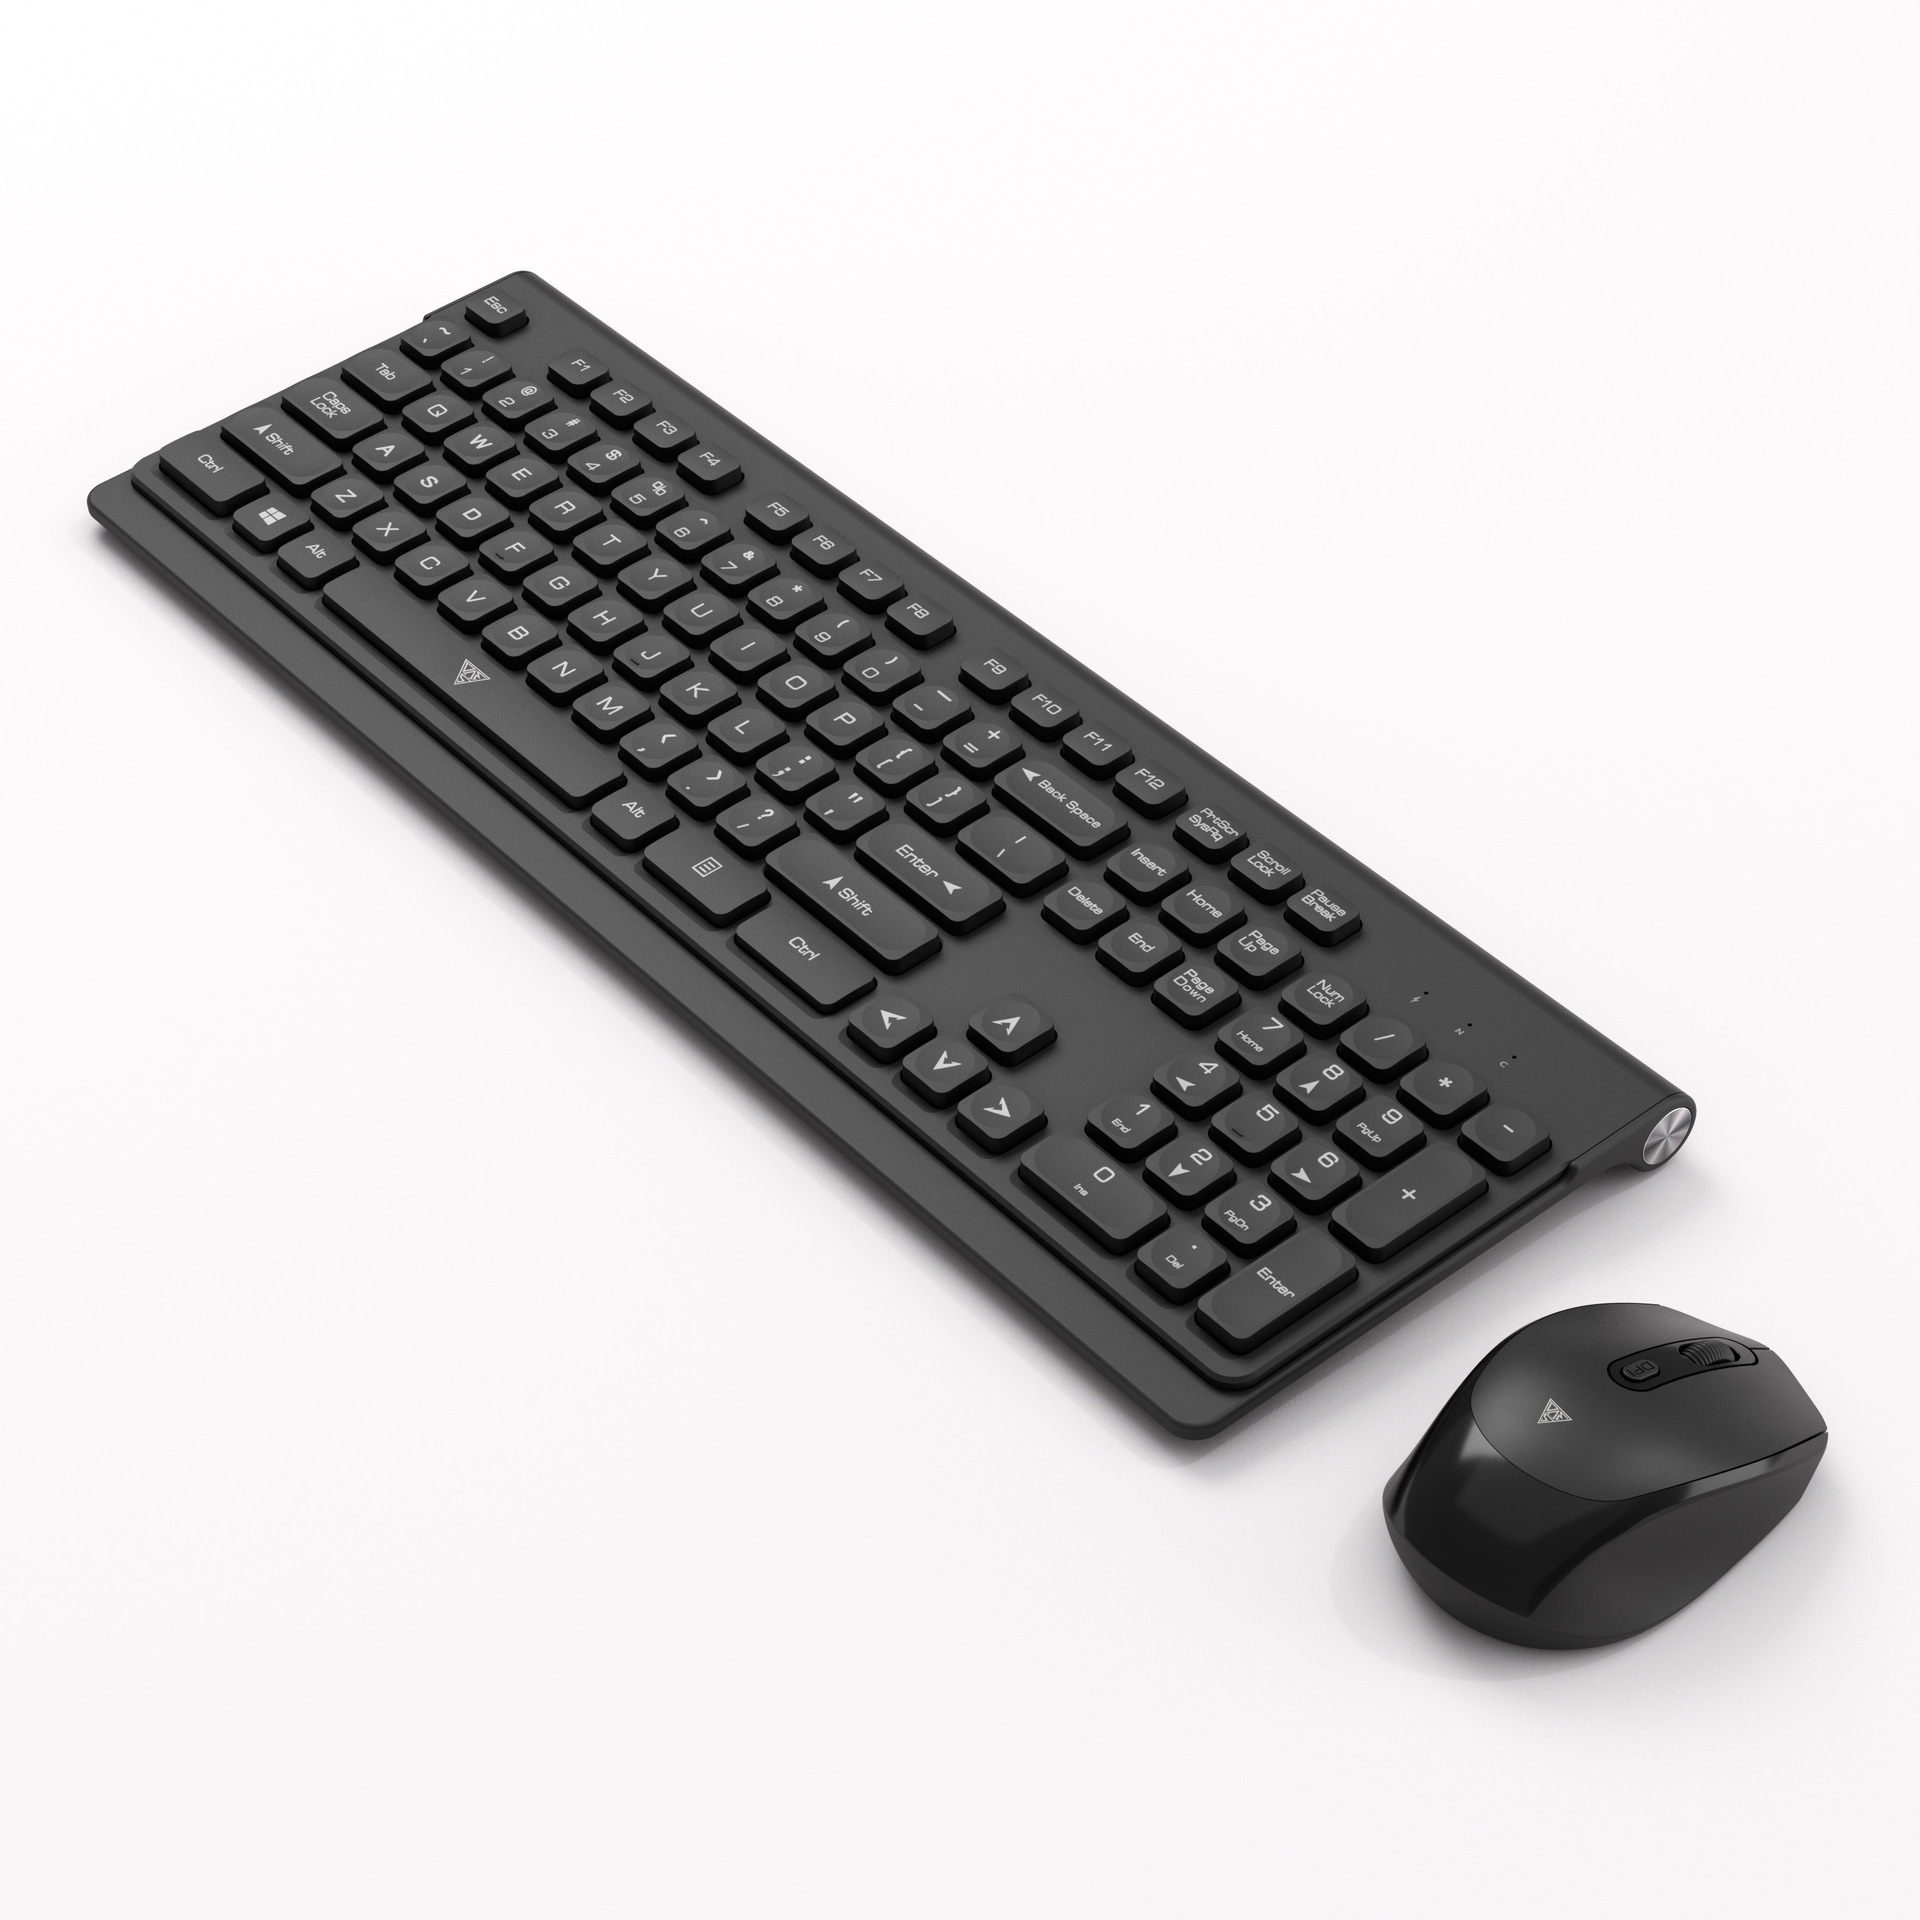 wireless keyboard mouse suit household to work in an office notebook Desktop girl student 2.4G Amazon keyboard wholesale